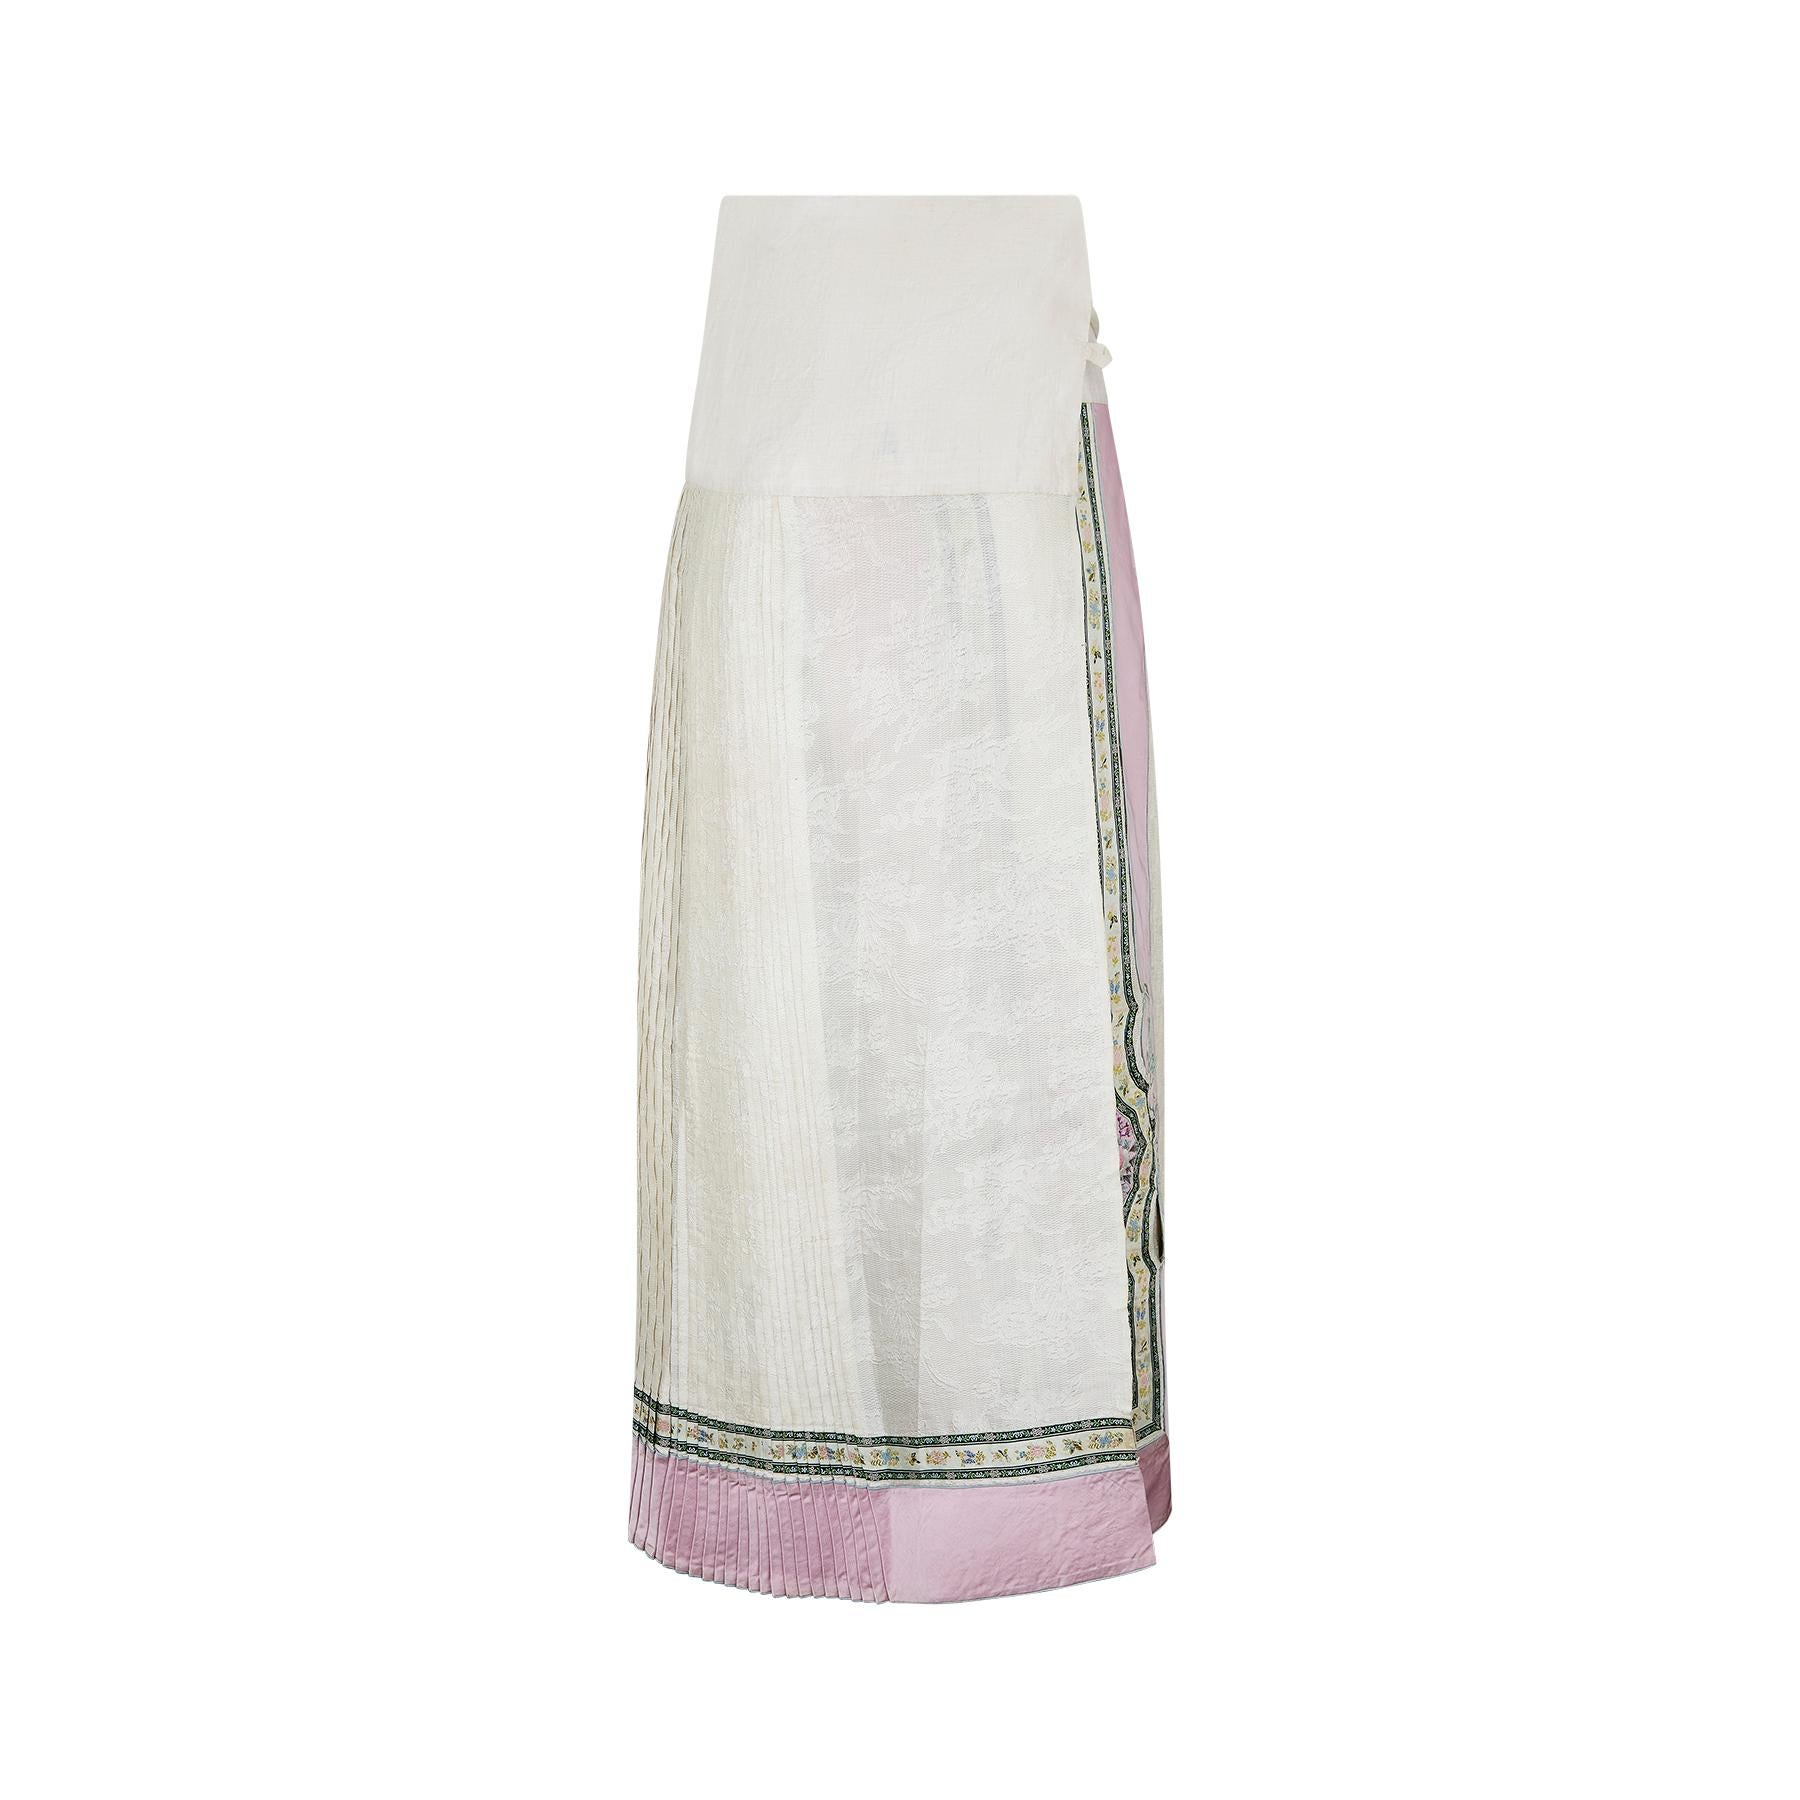 Women's 1890 - 1900s Han Dynasty Chinese Embroidered Wedding Apron Skirt For Sale